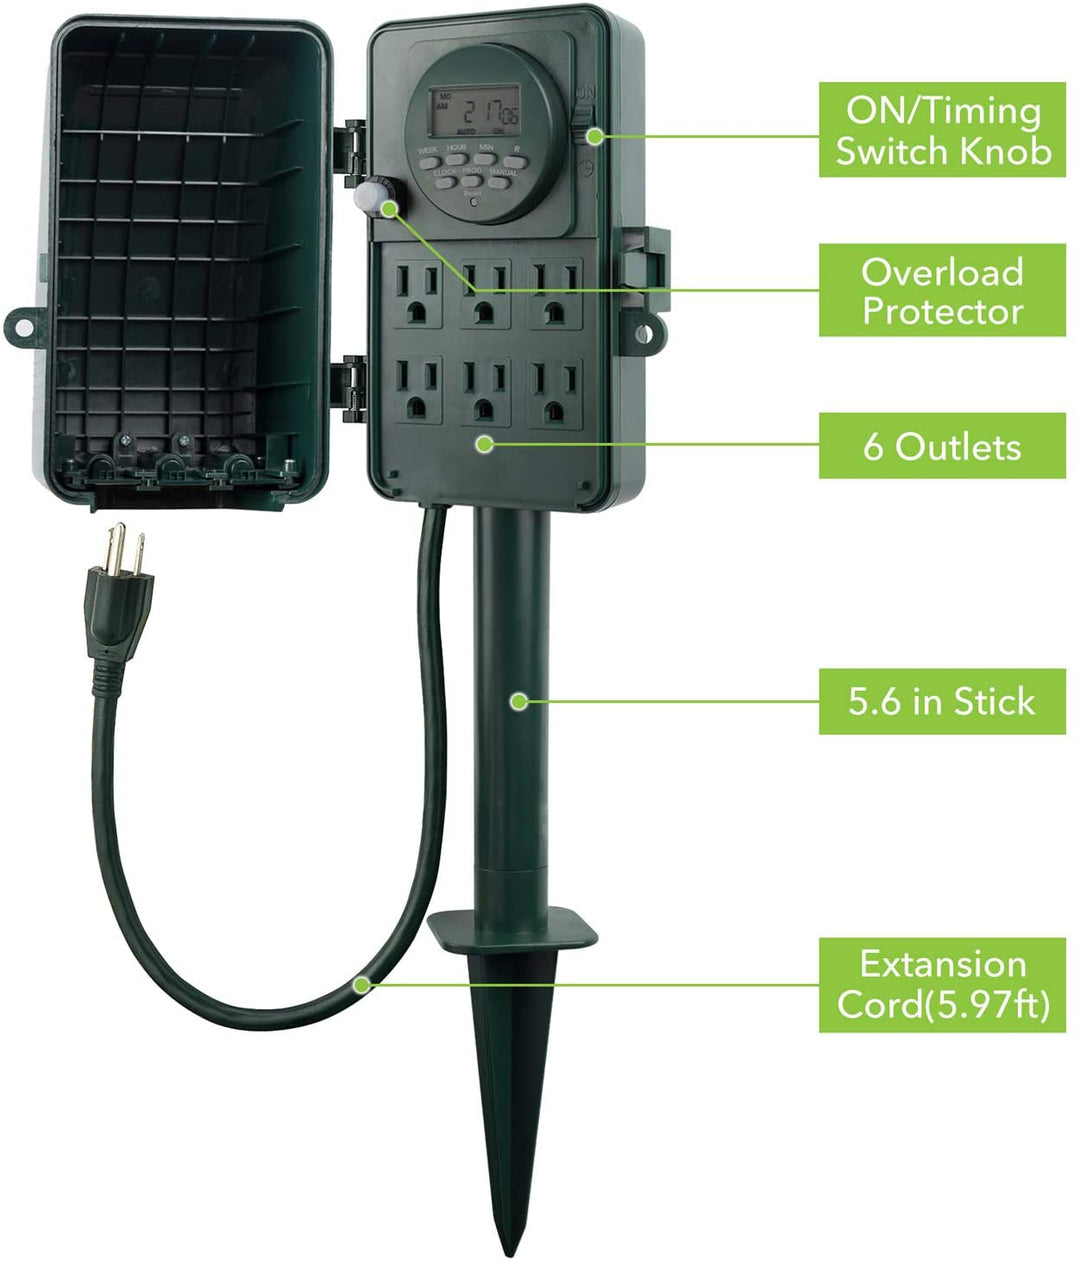 7 Day Heavy Duty Outdoor Digital Stake Timer 6 Outlets BN-LINK - BN-LINK